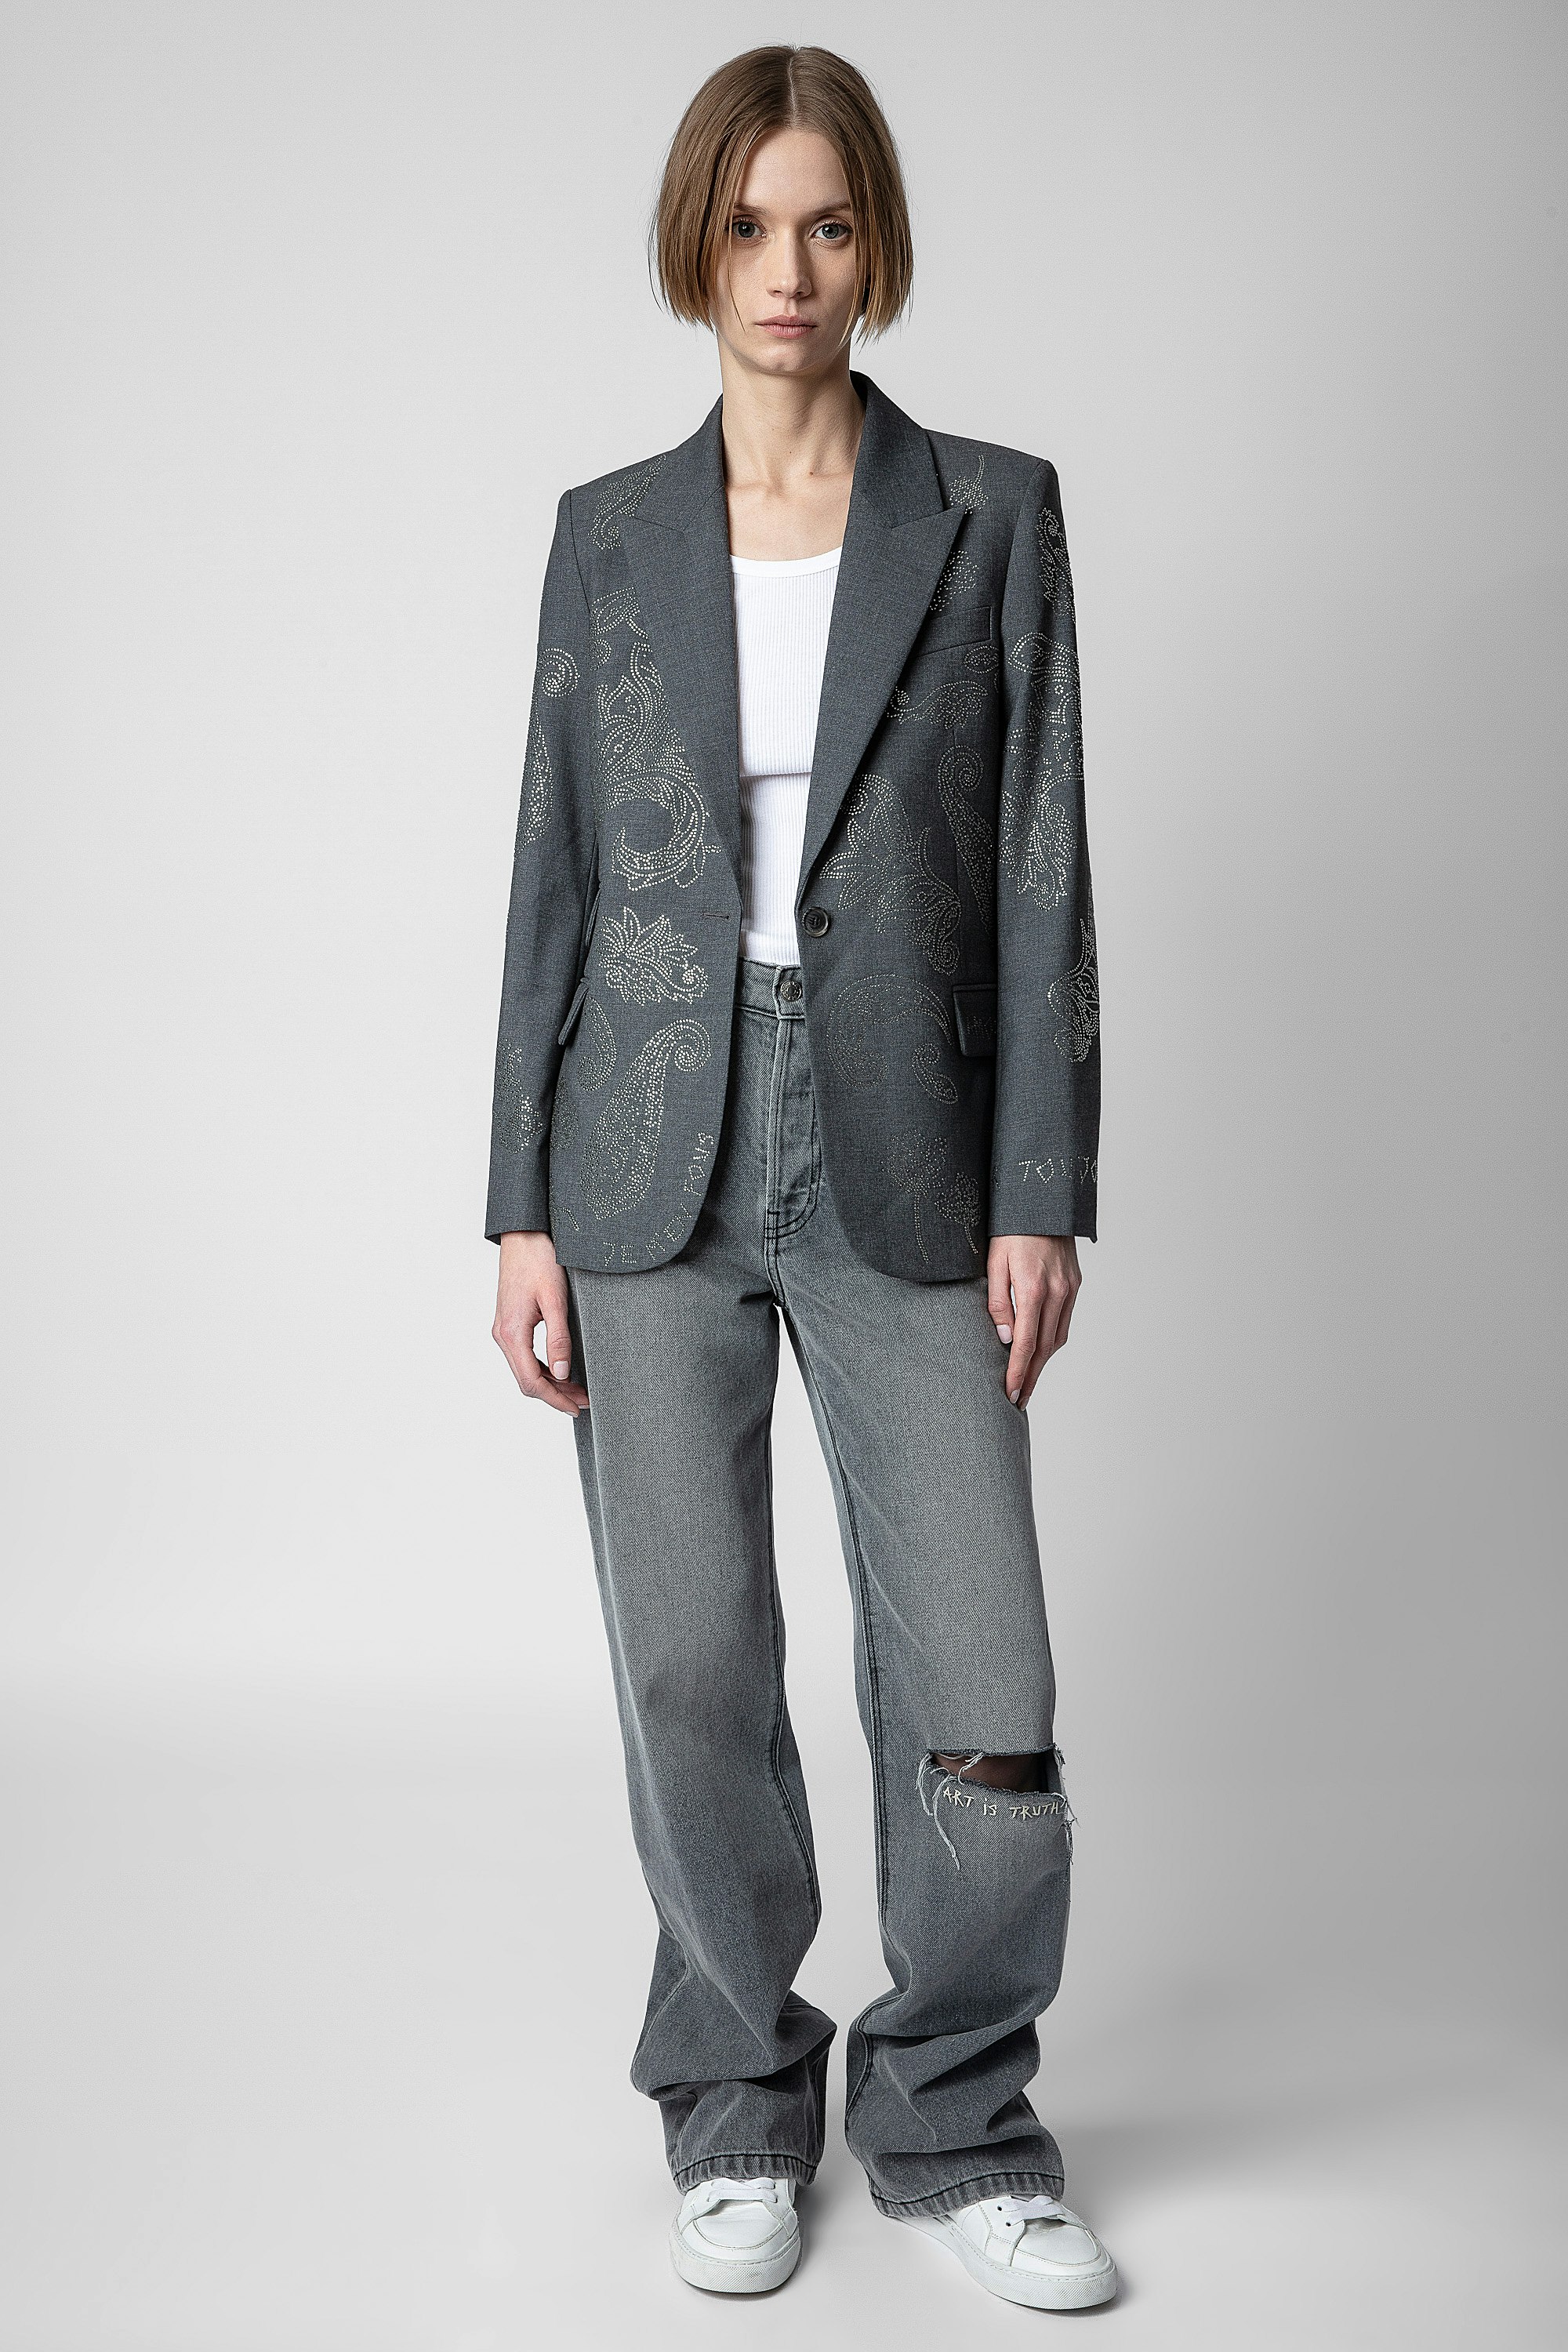 Venus Strass Blazer - Women’s grey tailored jacket with paisley pattern decorated with strass